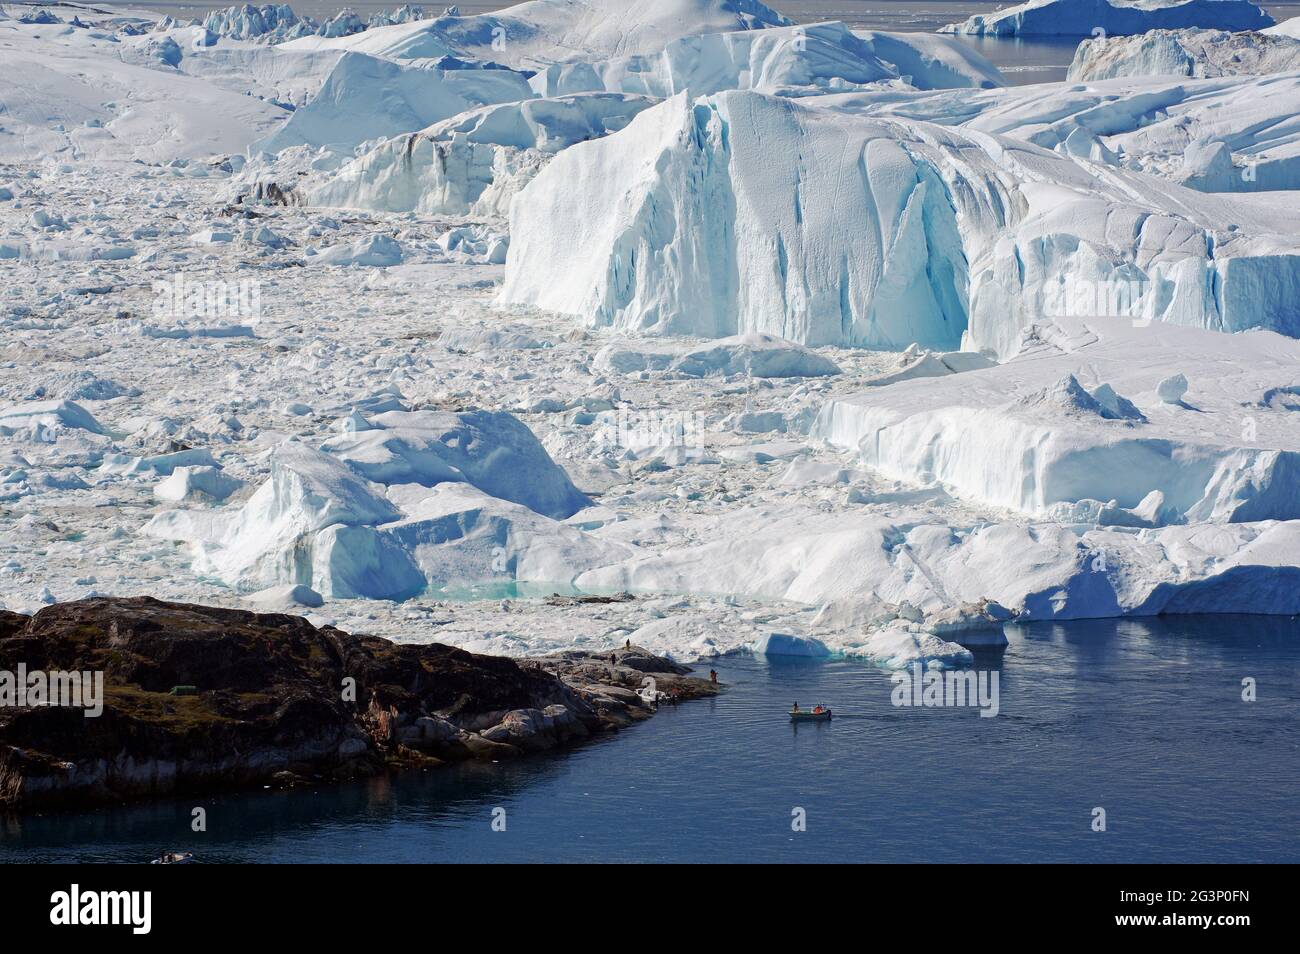 Boat in front of glacier - Ilulissat Stock Photo